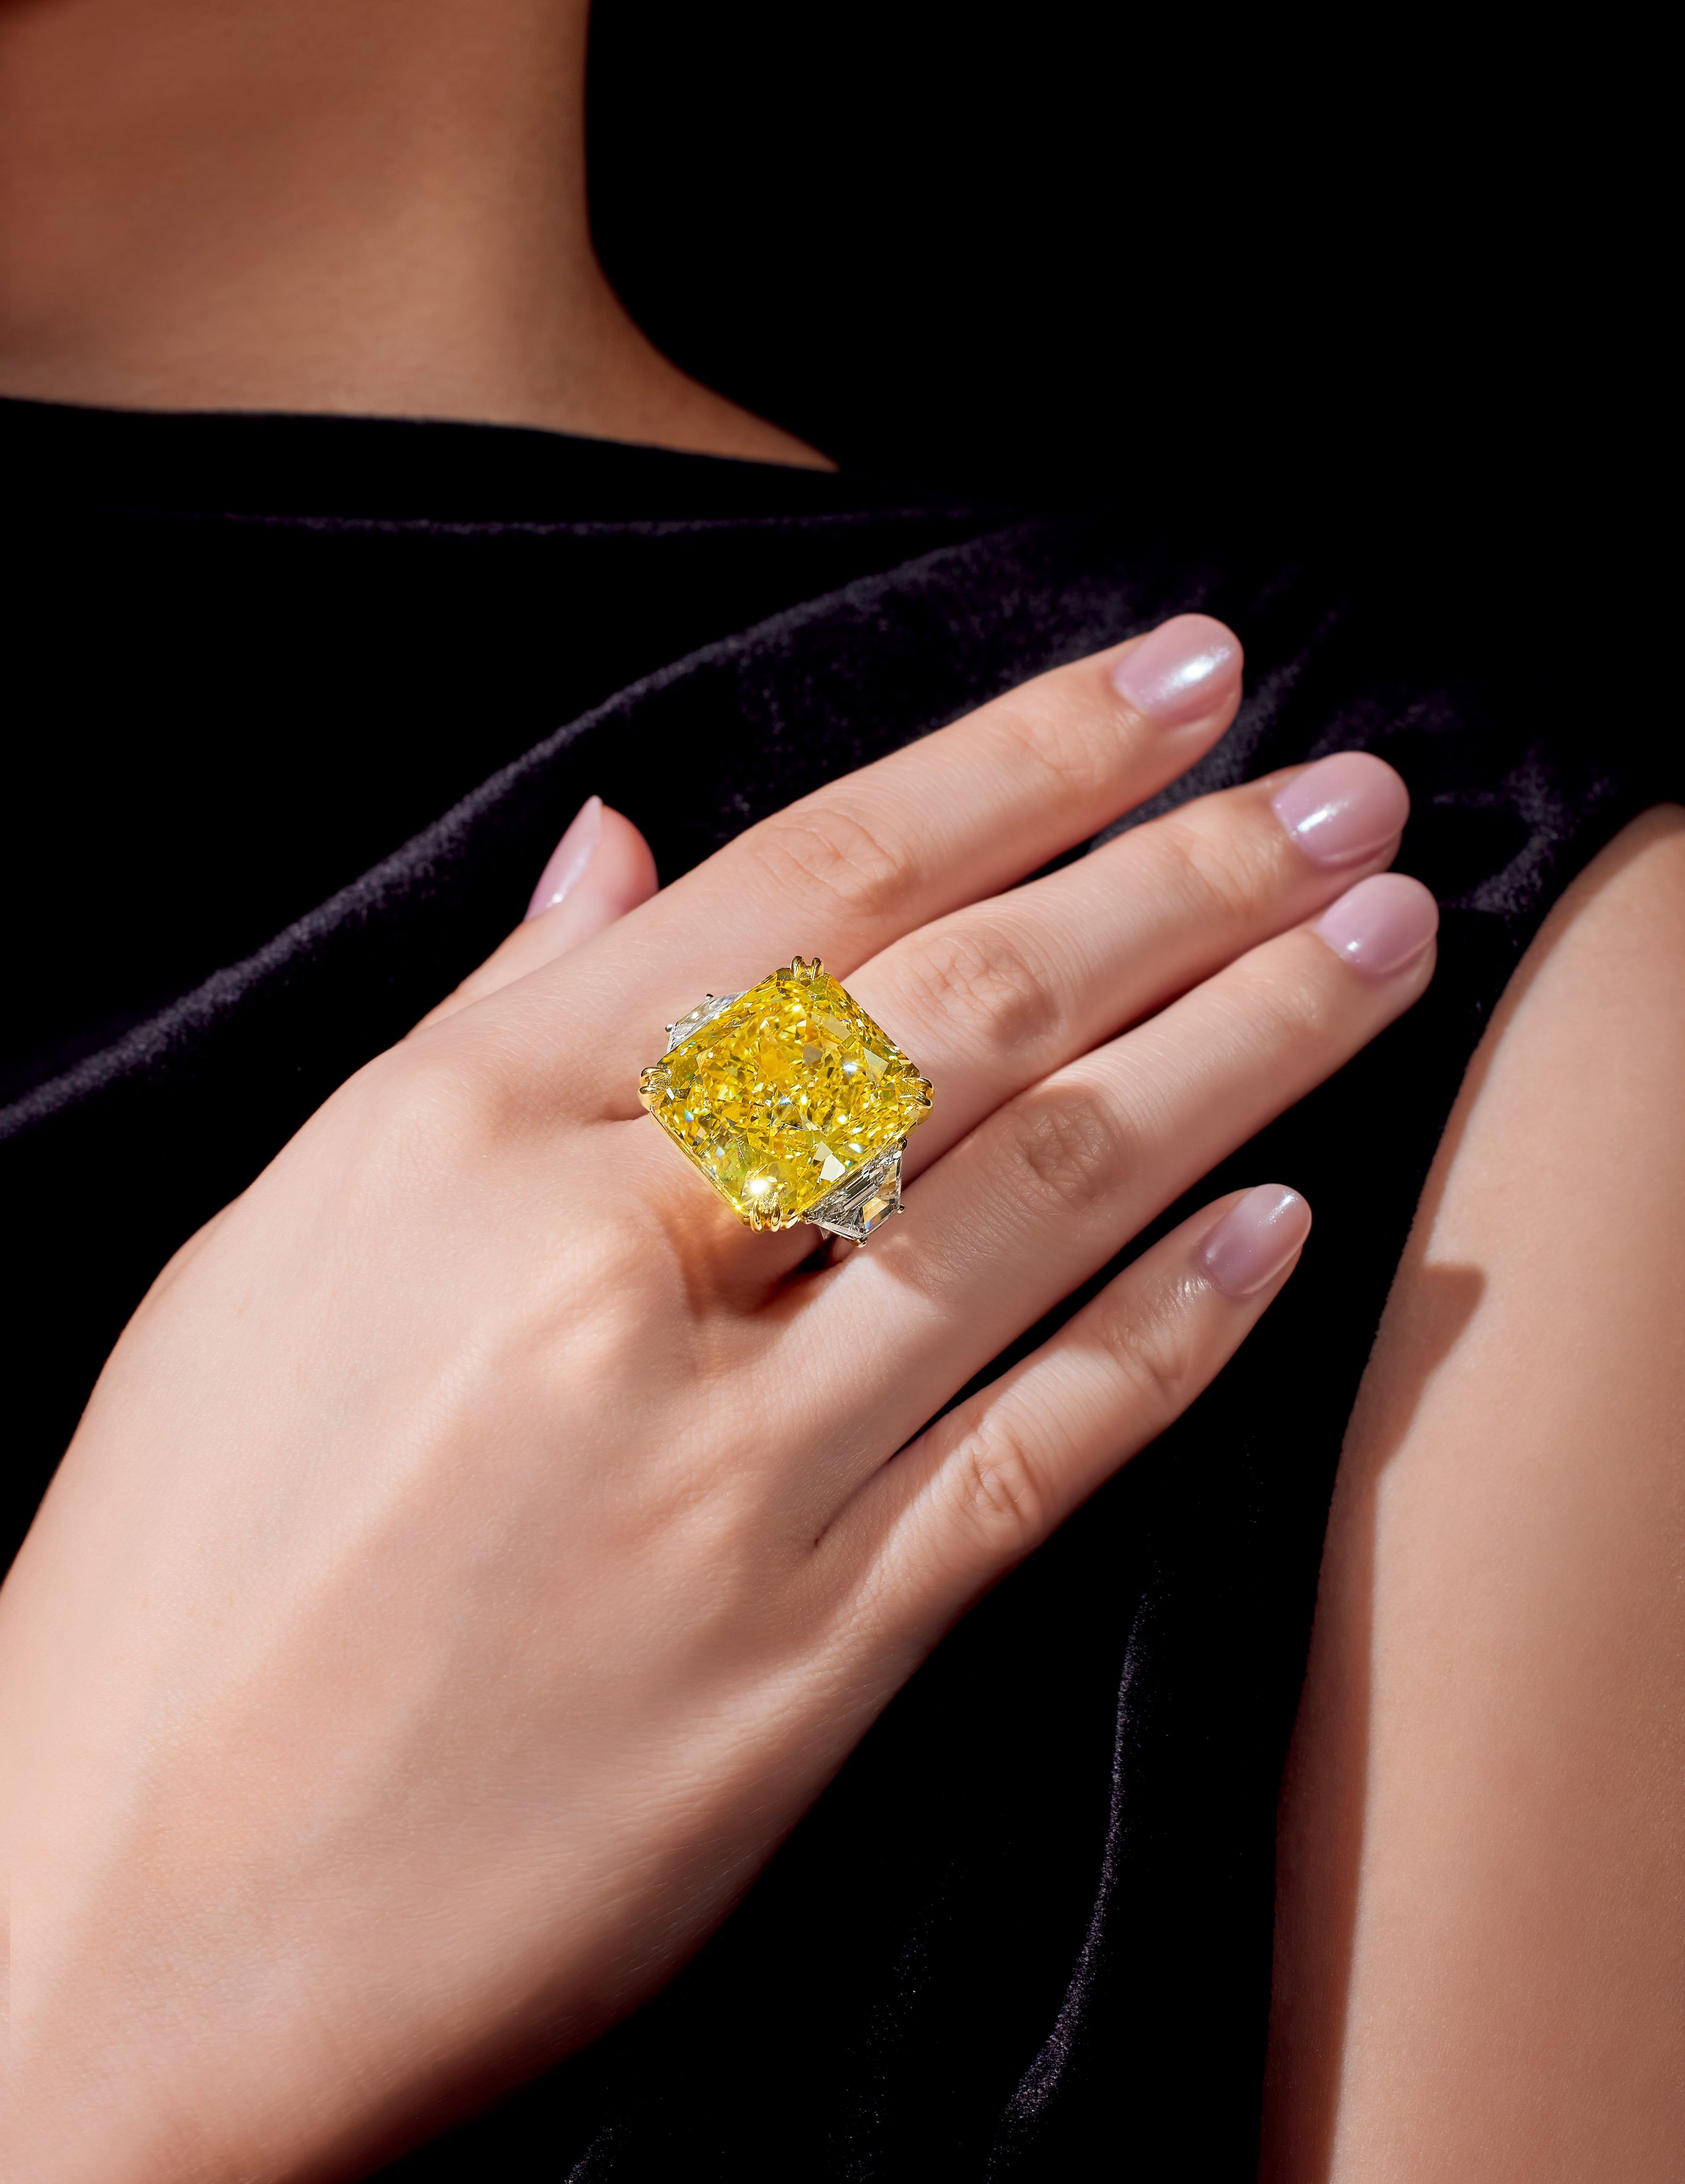 A 25.88-carat fancy vivid yellow diamond fetched HK$10.3 million (US$1.3 million) at the Poly Auction Hong Kong sale on October 5. Across the board at the top auction houses, fancy coloured diamonds as well as jadeite have been the standouts this autumn. Photos: Handouts